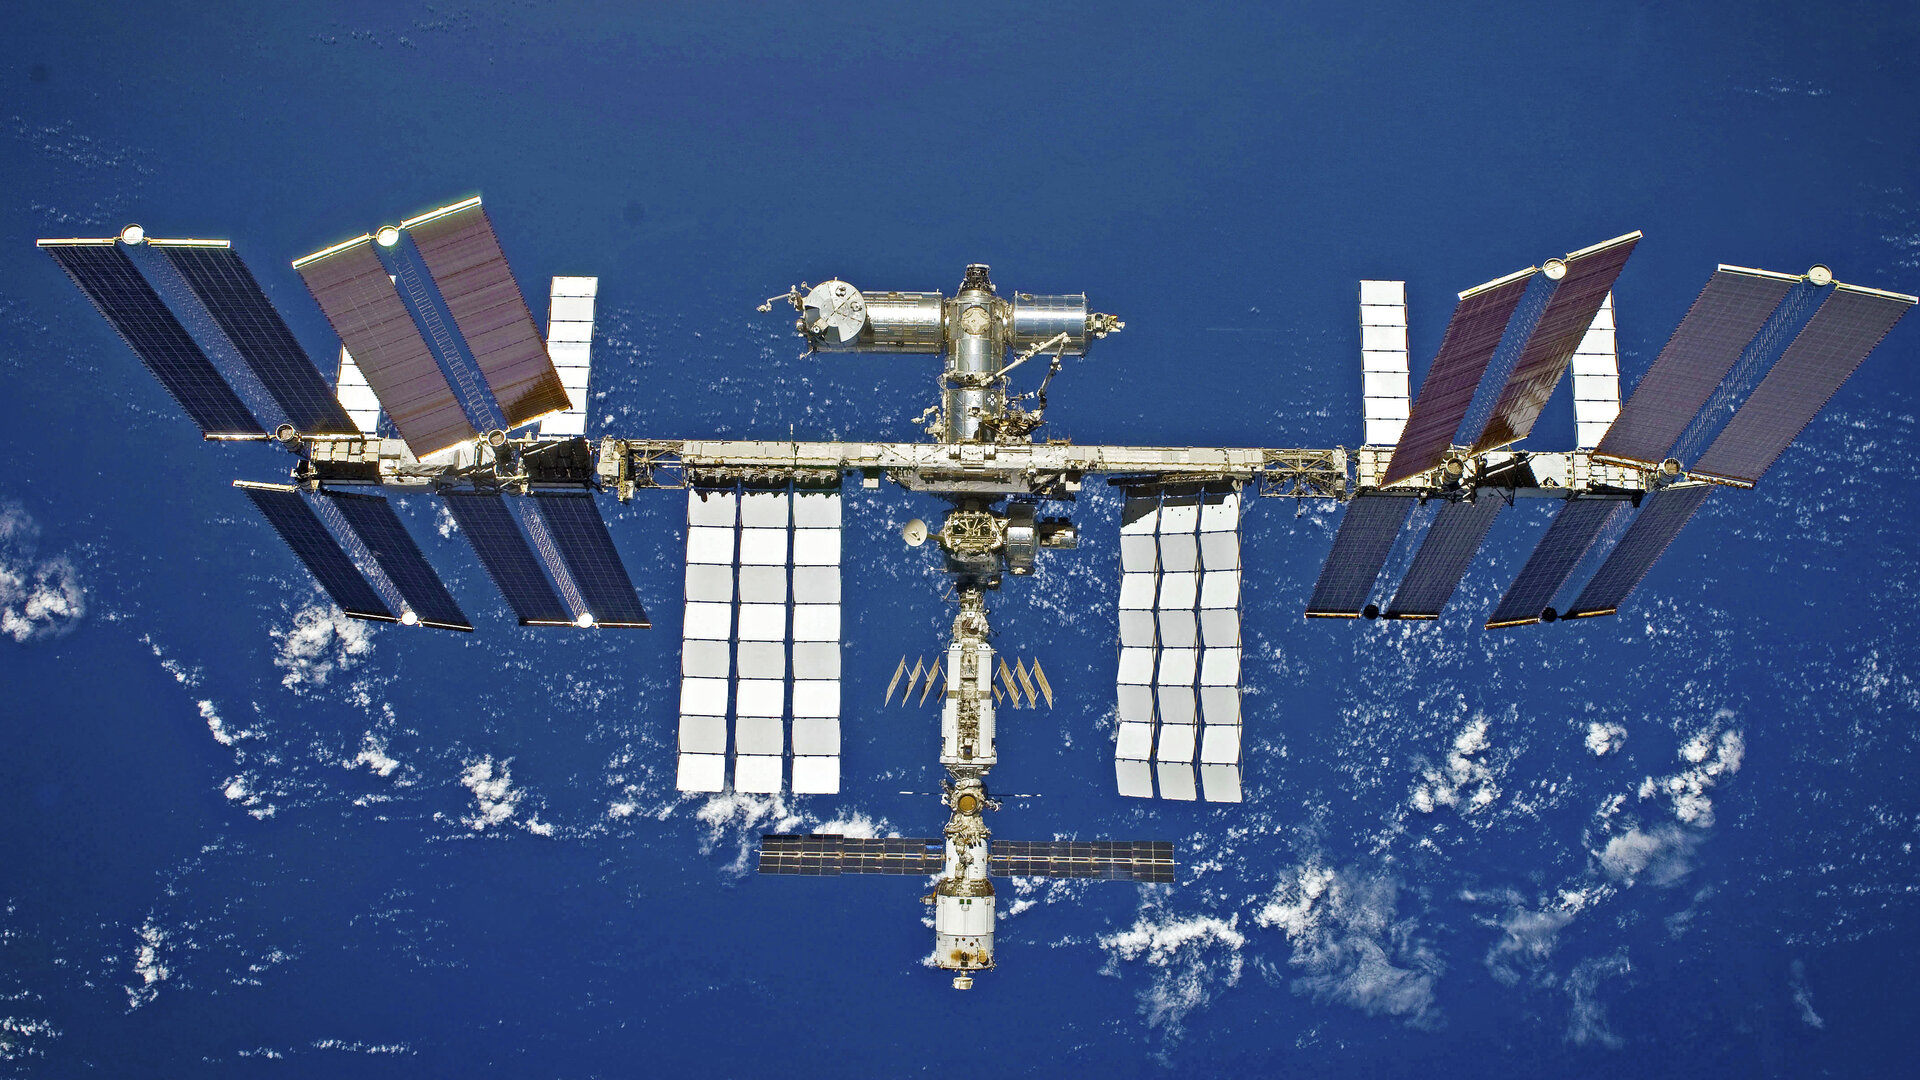 The oldest Russian module on the ISS may not survive until 2025: cracks were found in it